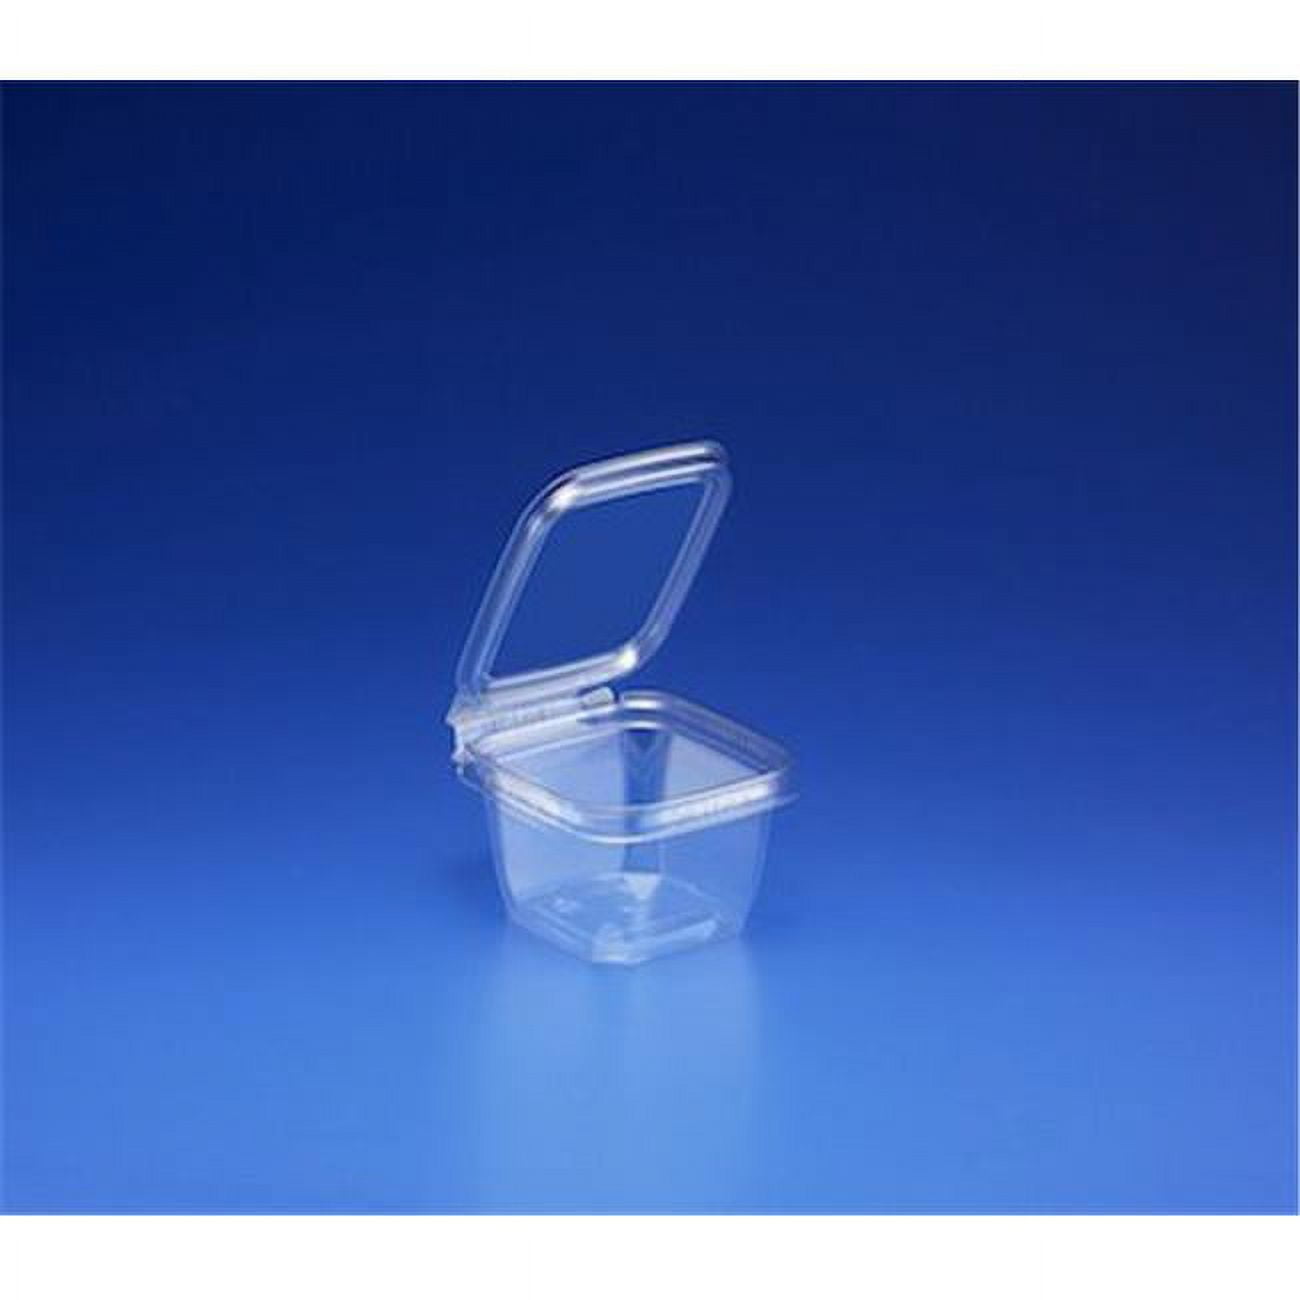 Ts4012 12 Oz Squareware Clamshell Pete Tamper Resistant, Clear - Case Of 288